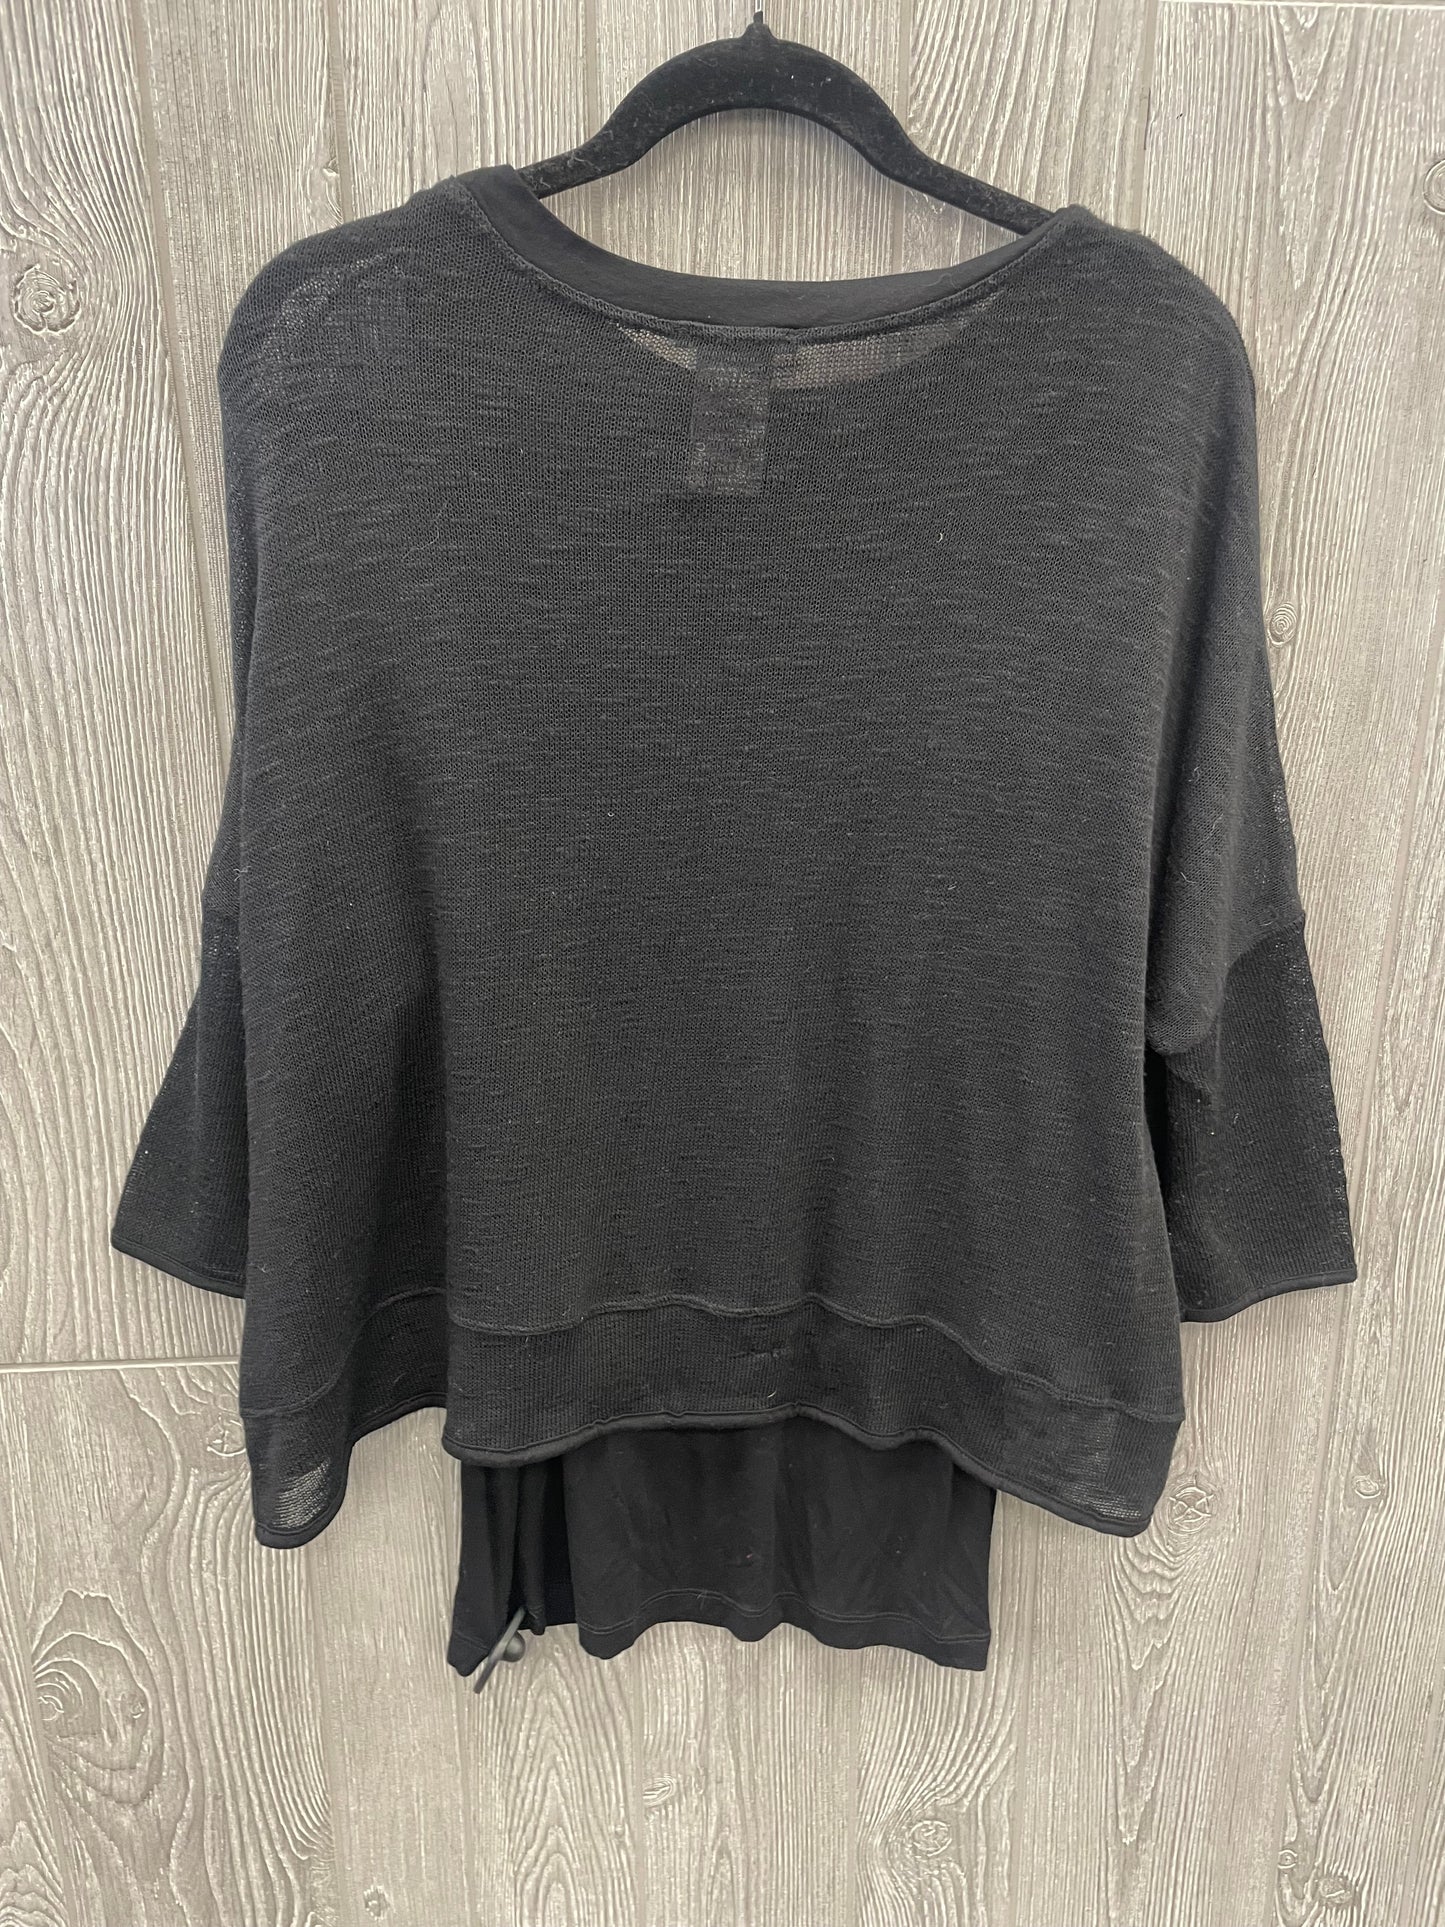 Black Top Long Sleeve Chelsea And Theodore, Size M